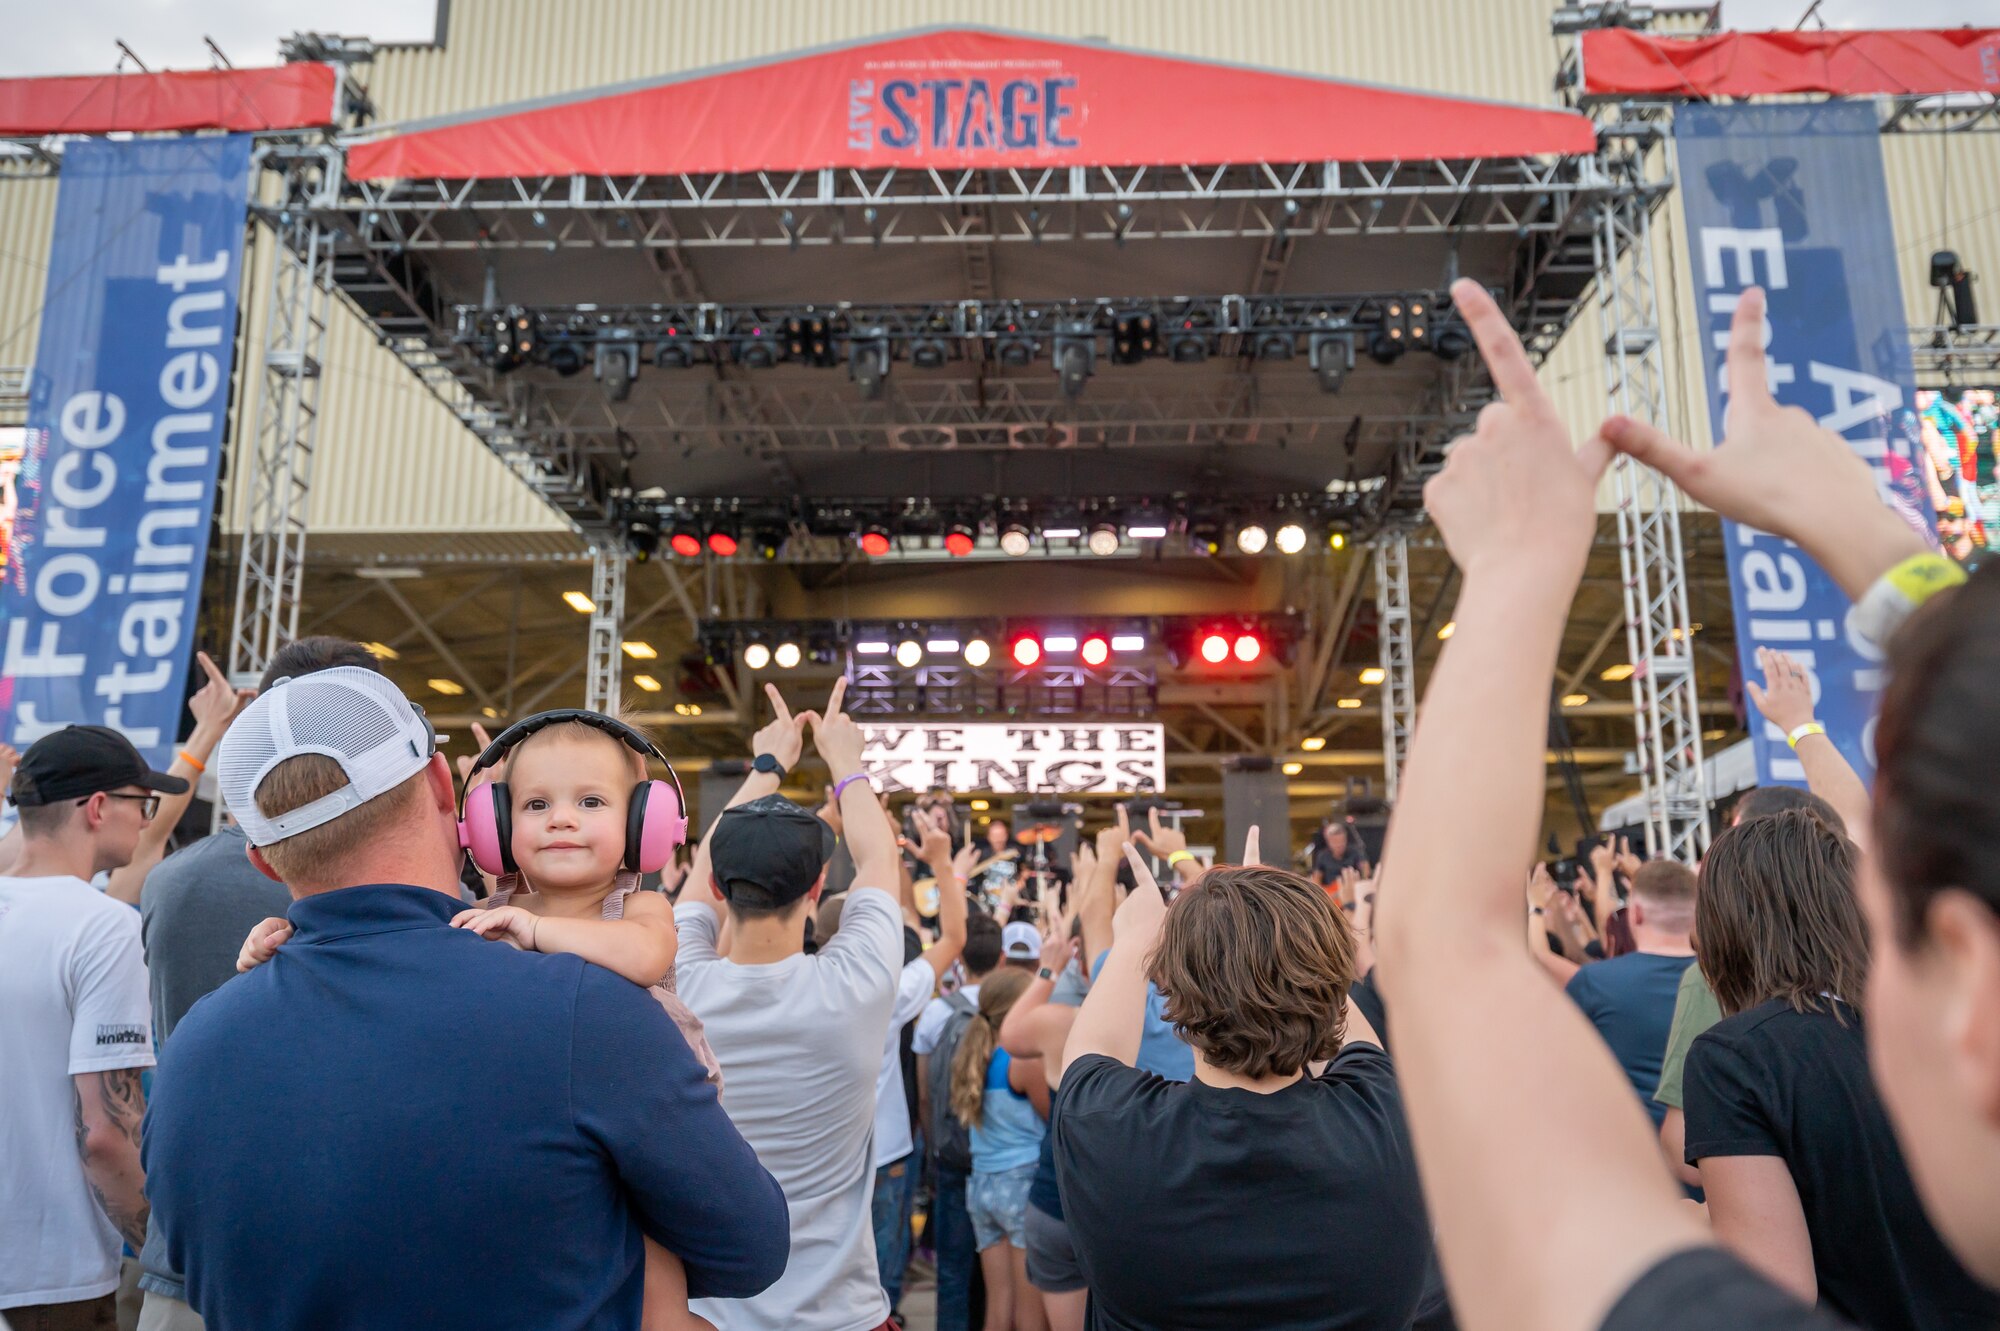 Audience members dance to a song played by the rock band We the Kings during Rock Fest Aug. 20, 2022, at Malmstrom Air Force Base, Mont.